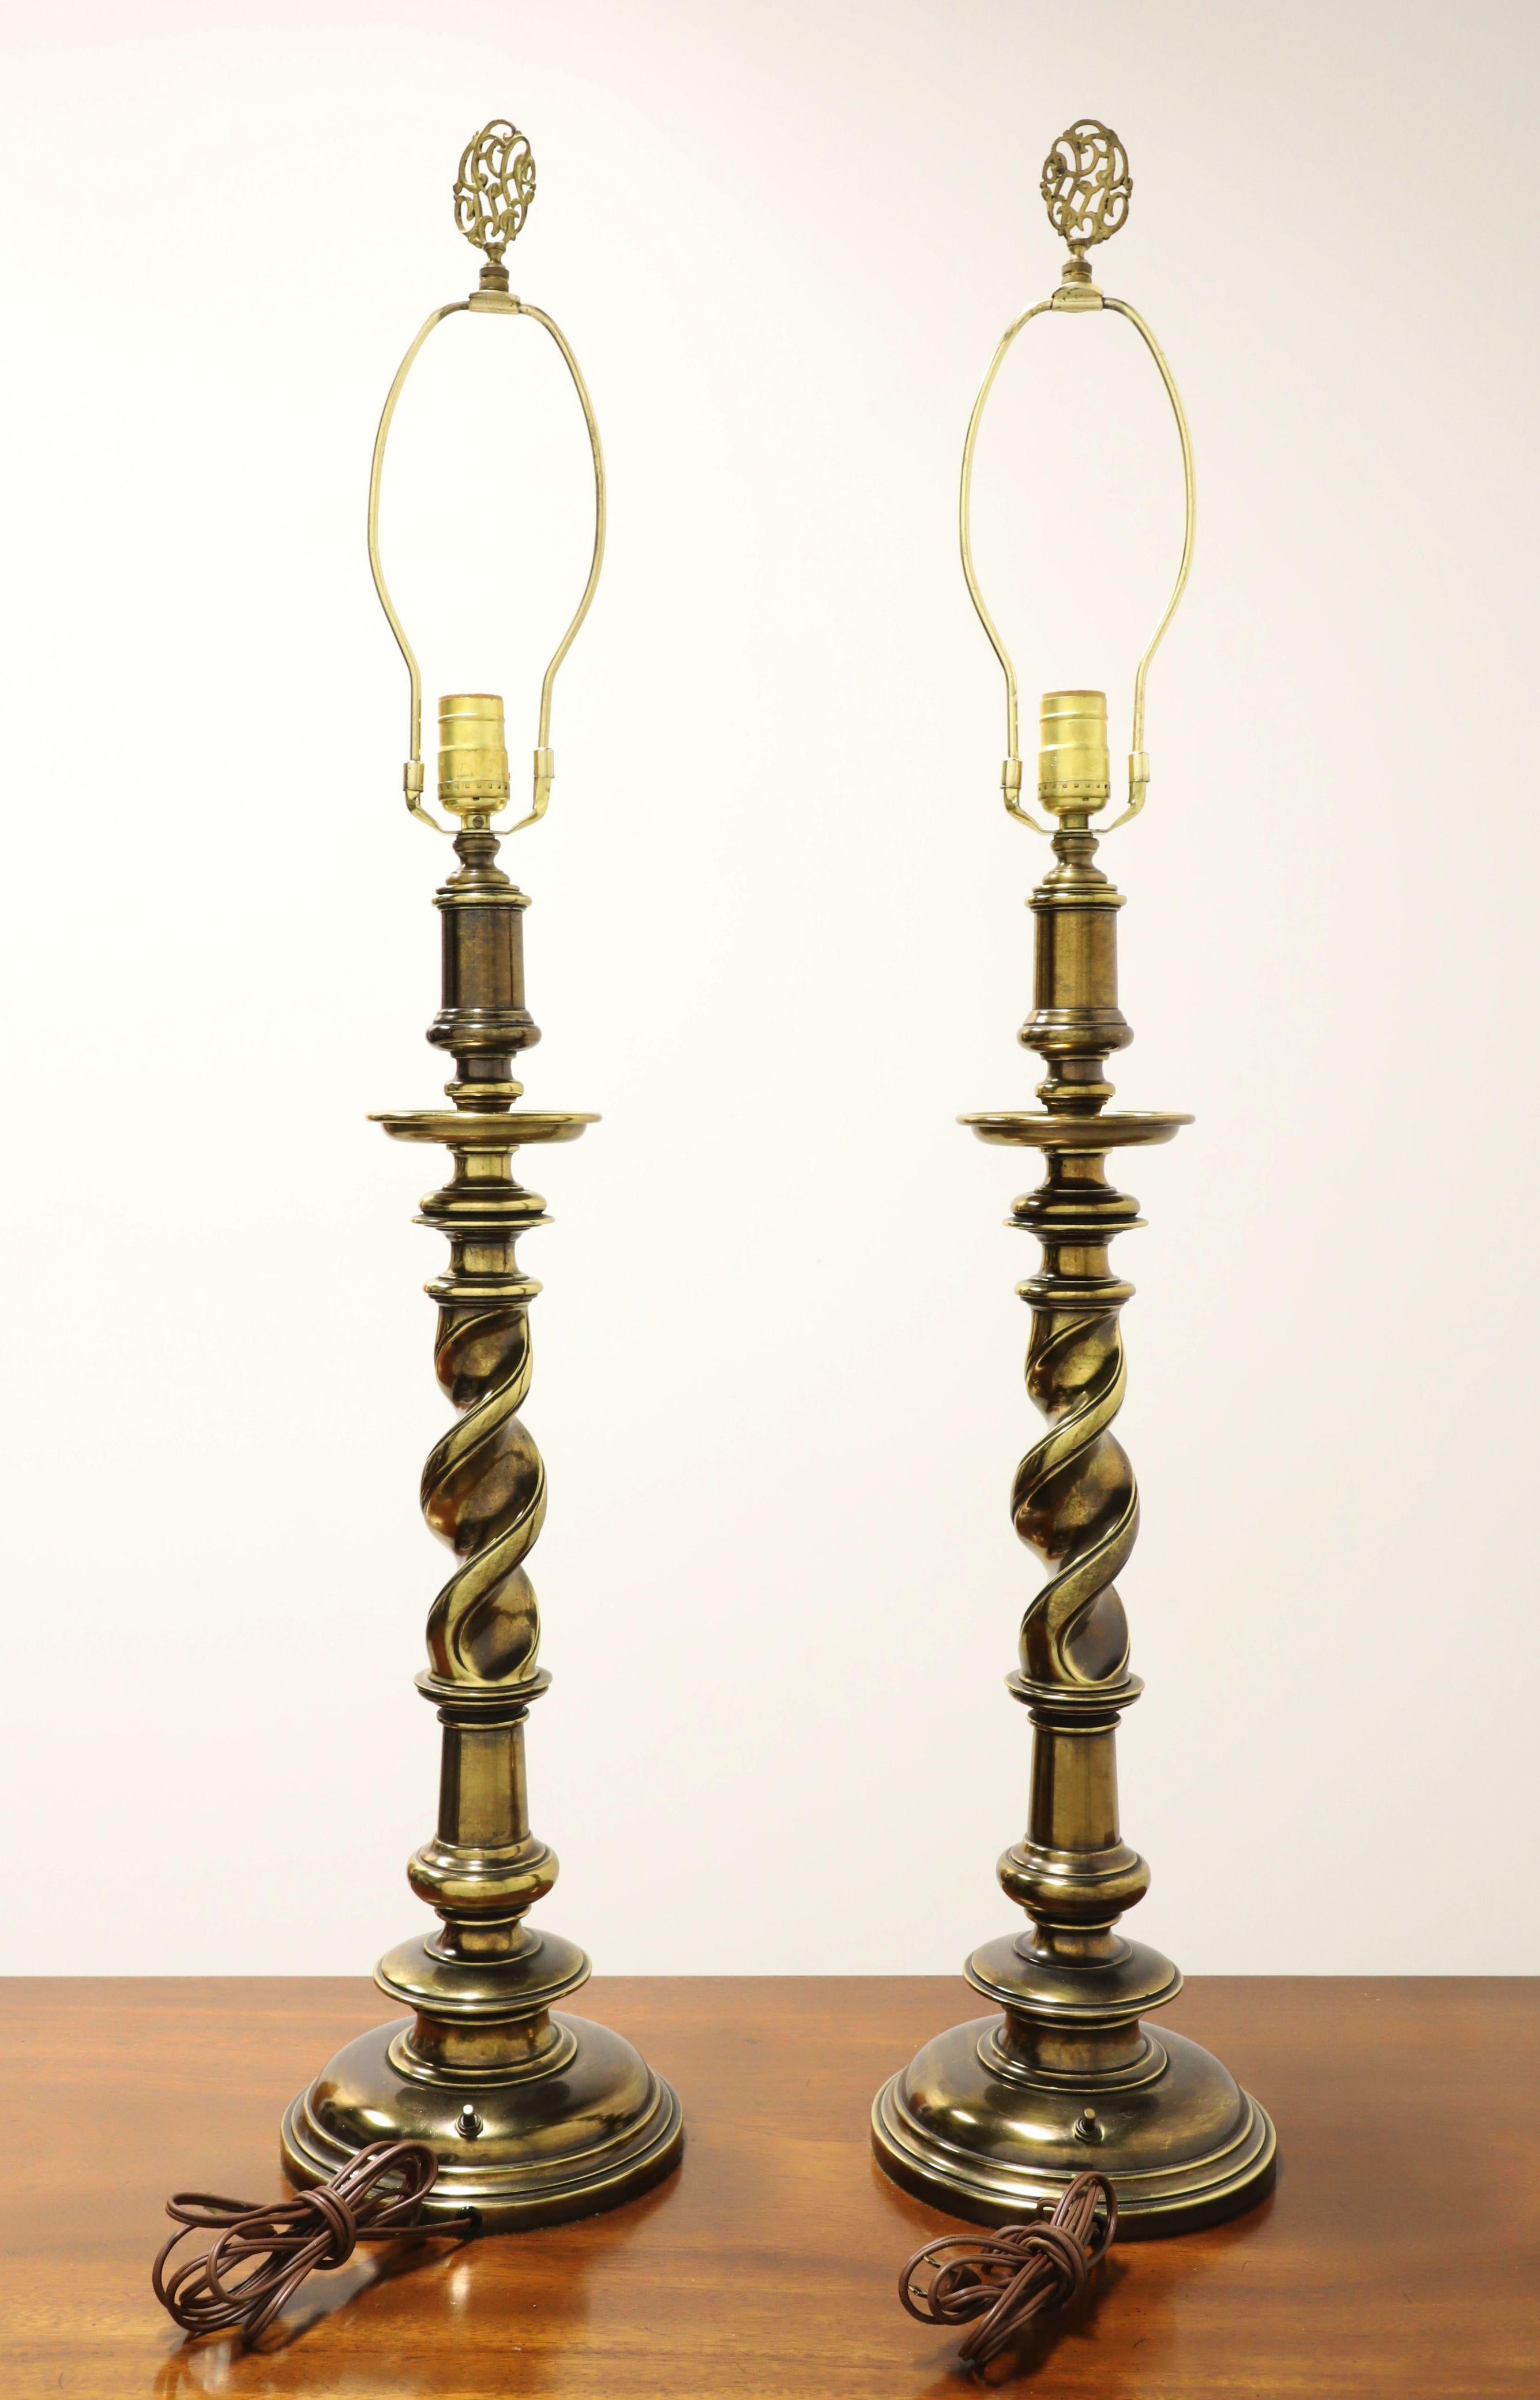 American 1960's Hollywood Regency Brass Barley Twist Table Lamps - Pair For Sale